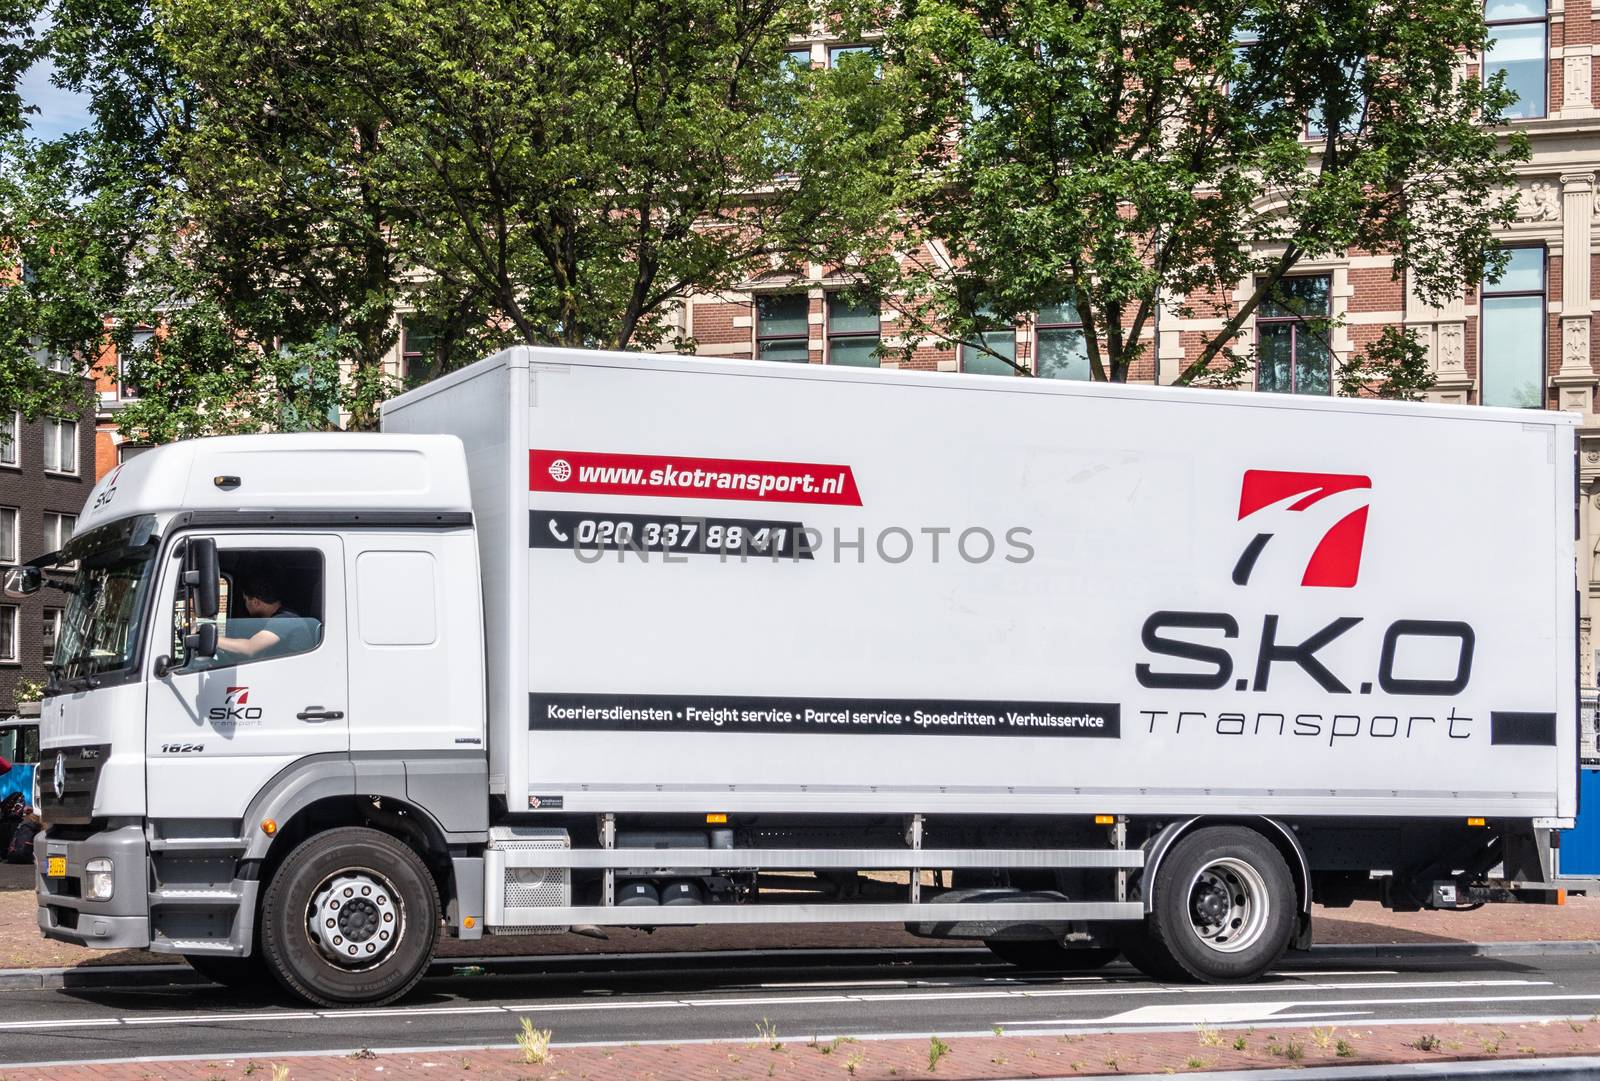 Amsterdam, the Netherlands - June 30, 2019: Large white transport truck with black and red lettering for S.K.O. company. Green foliage above. Brown-white facades in back.